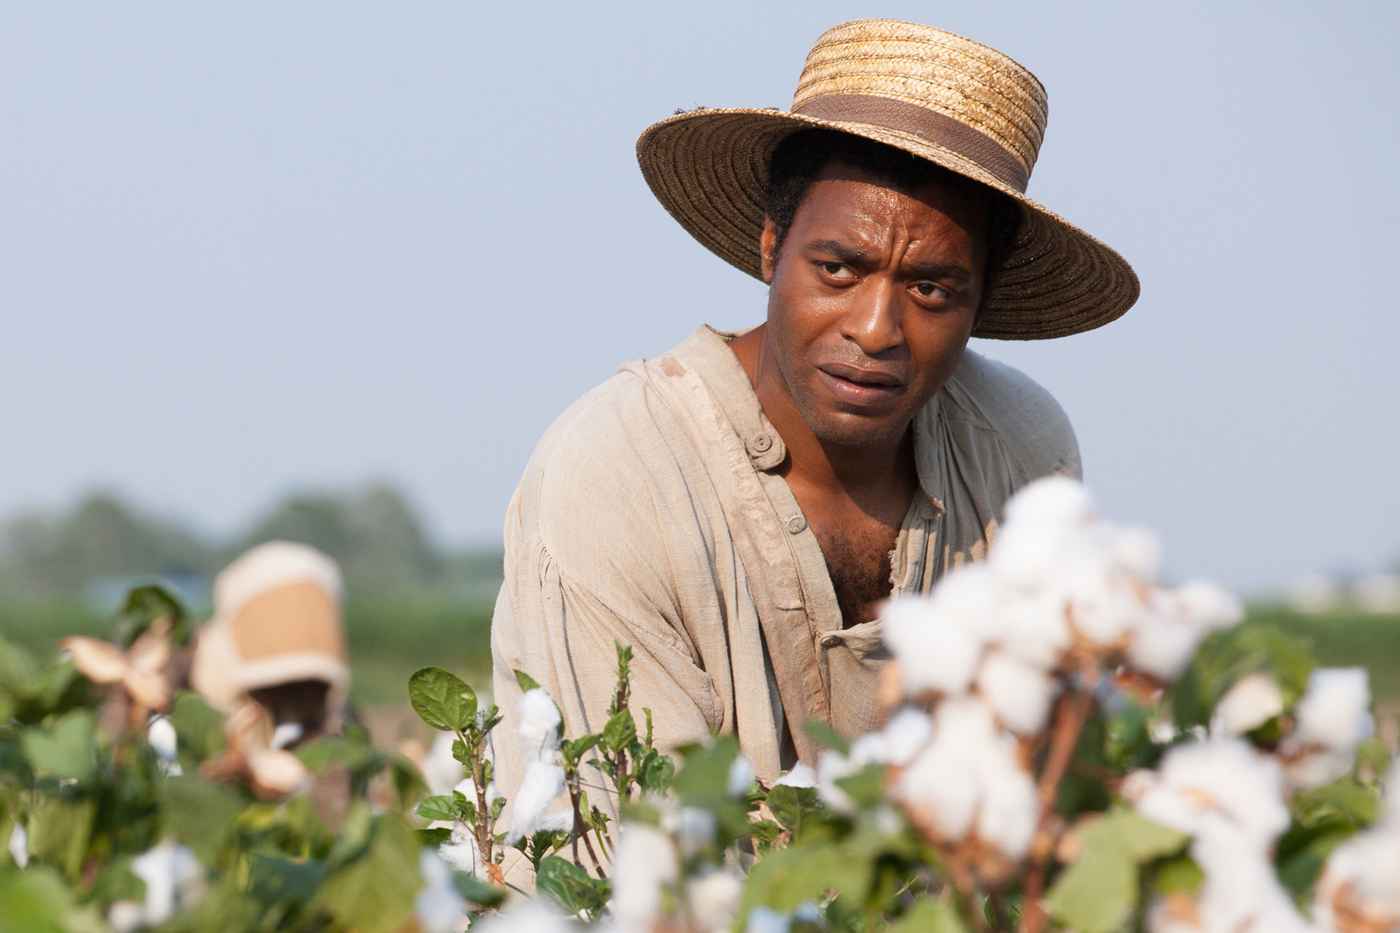 12 Years A Slave (2013)